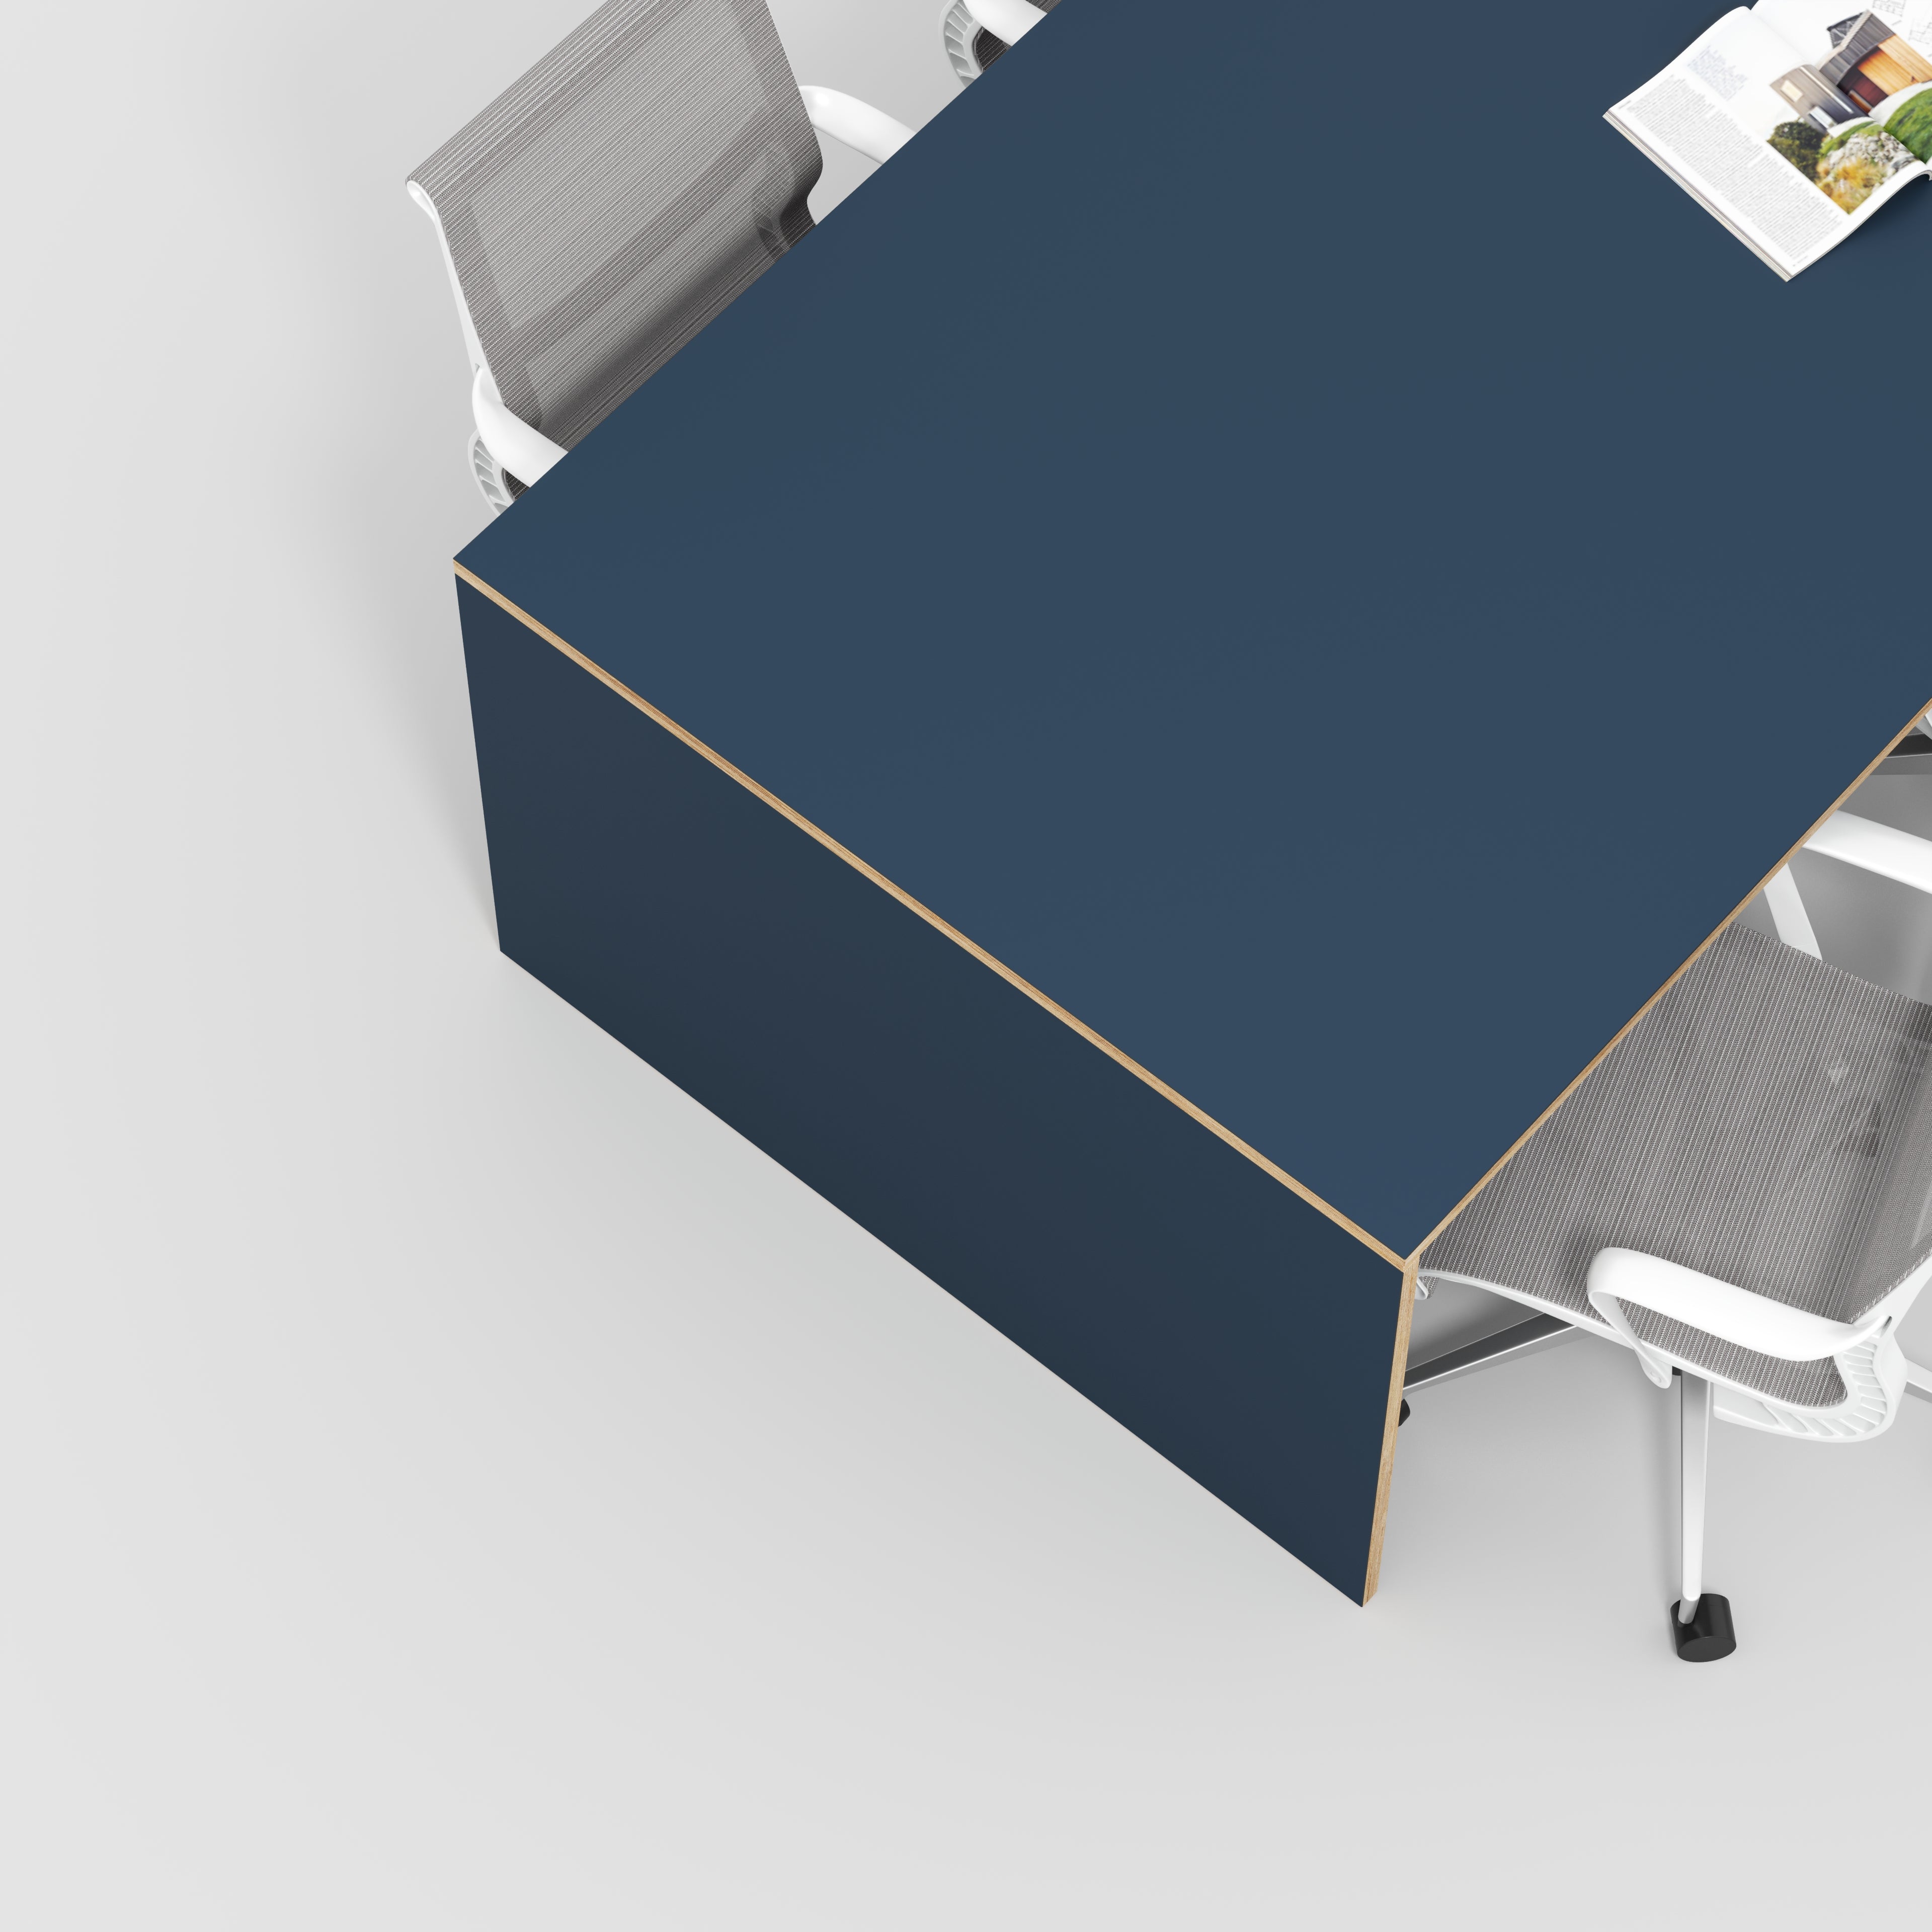 Table with Solid Sides - Formica Night Sea Blue - 2400(w) x 1200(d) x 750(h)